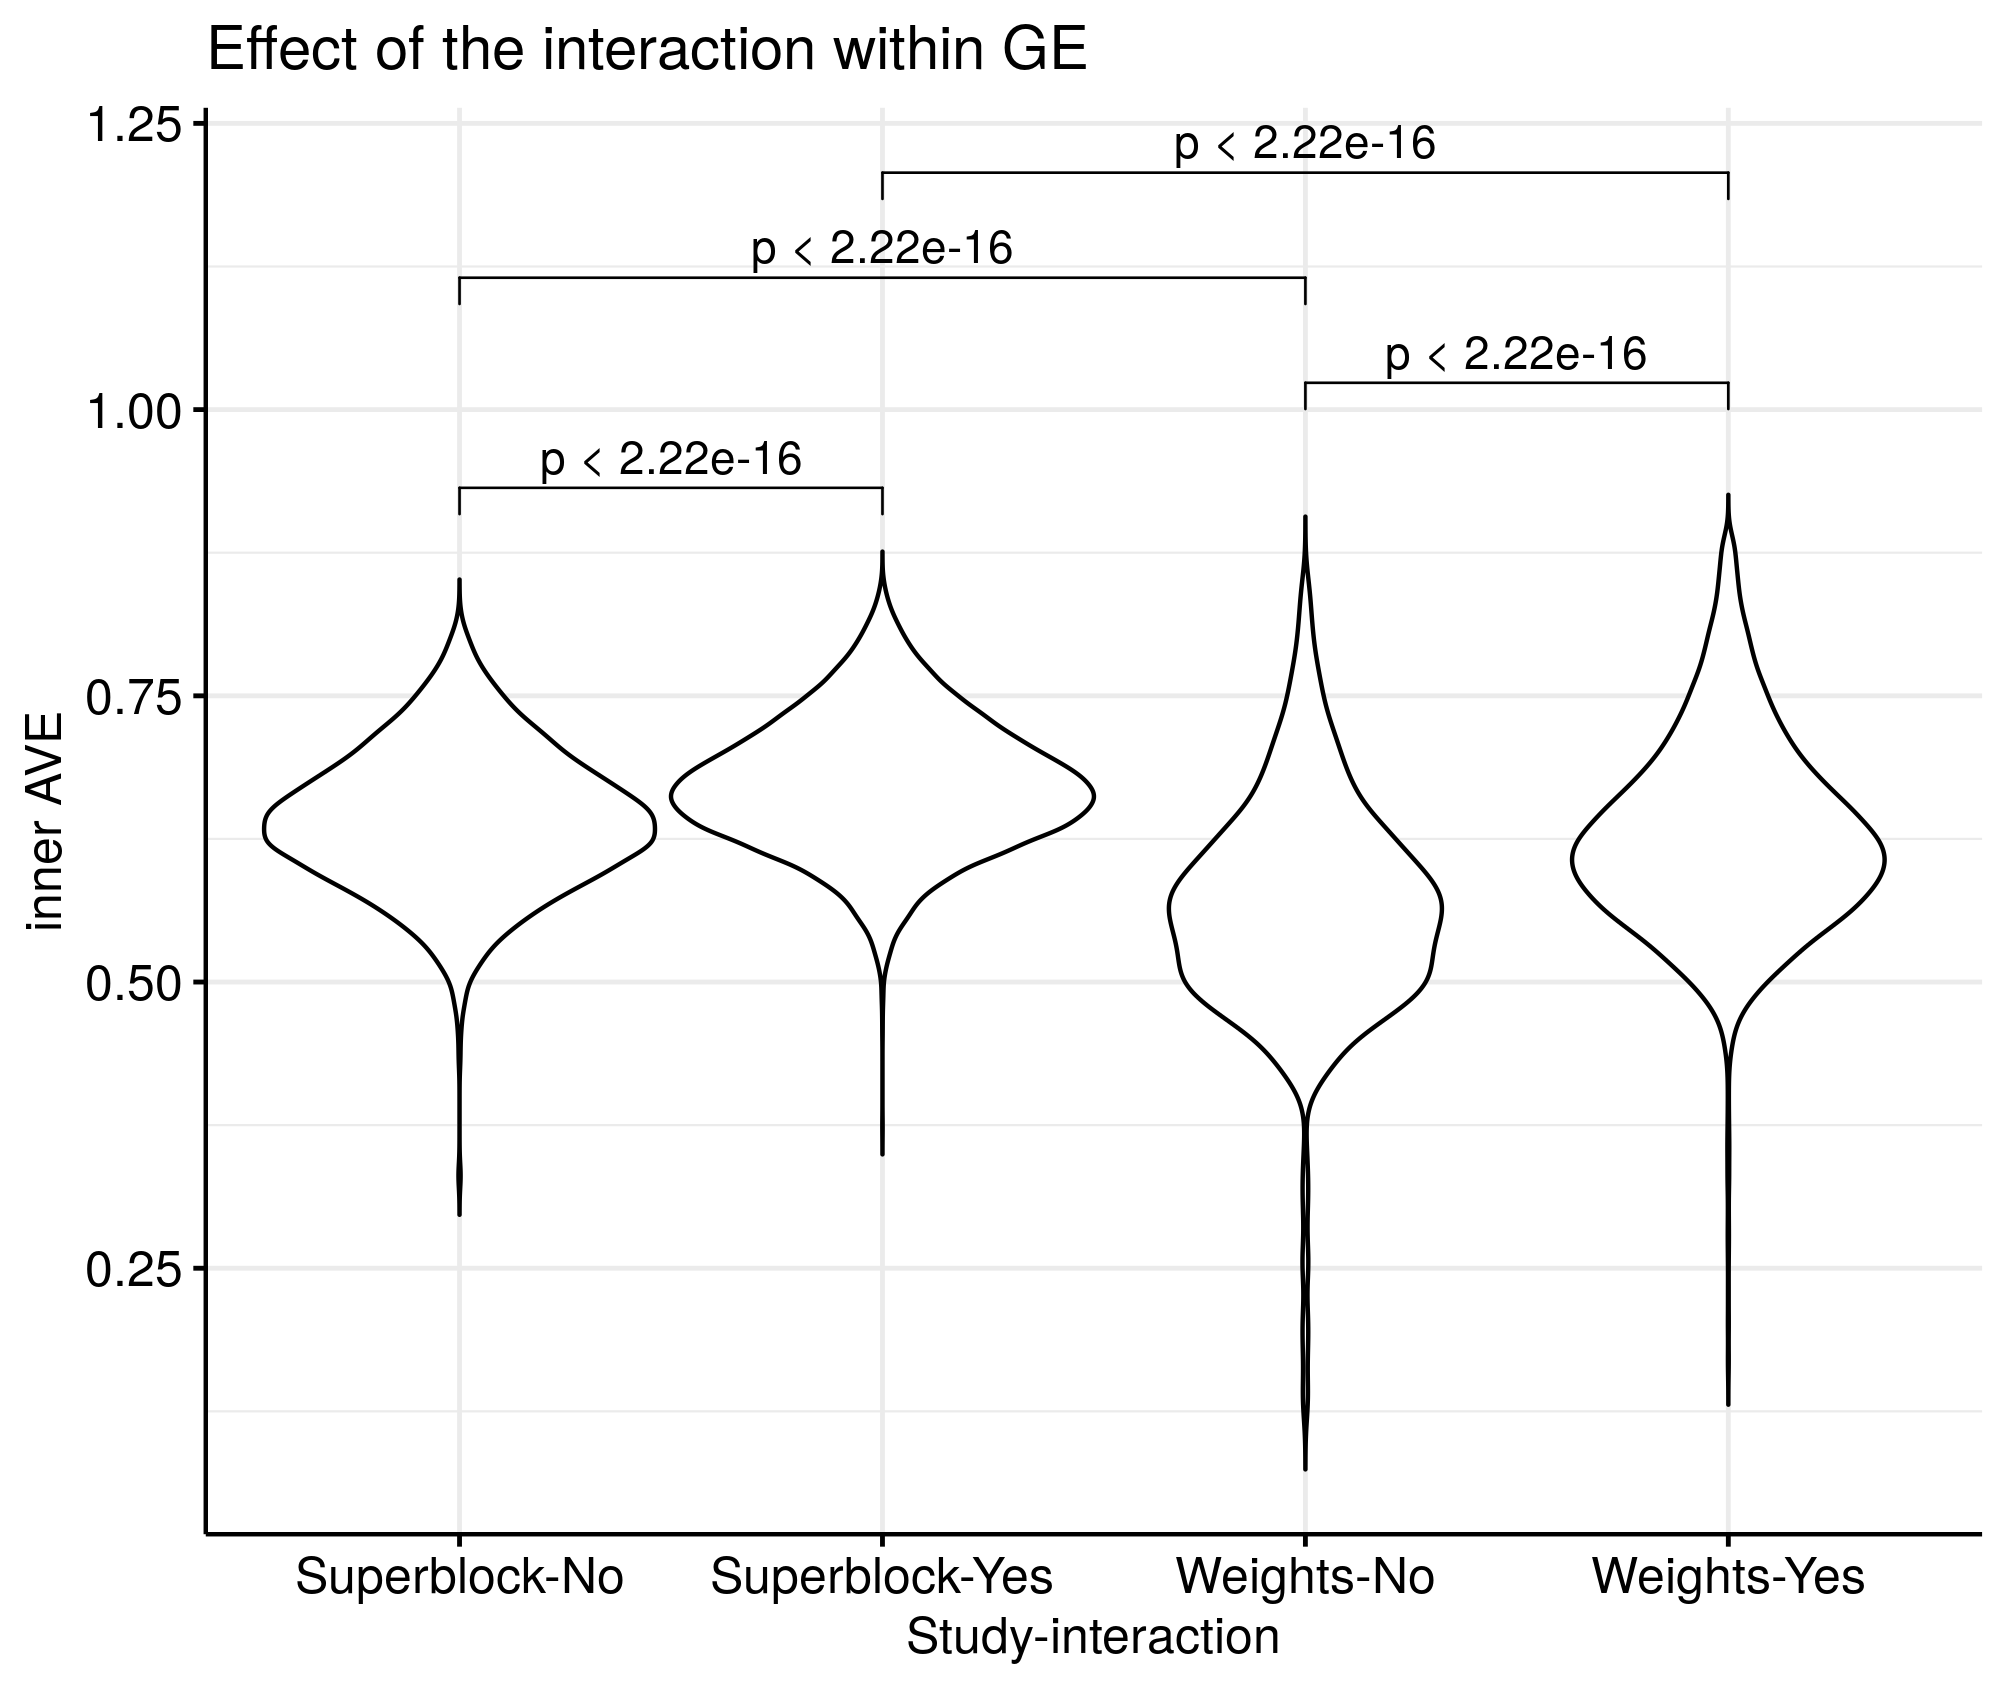 Effects of superblock and weights on the inner AVE on Puget's dataset. Designs with the superblock showed higher inner AVE scores than without it. Interaction yes/no indicates RNA and RNA interaction. Higher inner AVE values are associated with relationships within the GE (p-values shown on top of the violin plots).